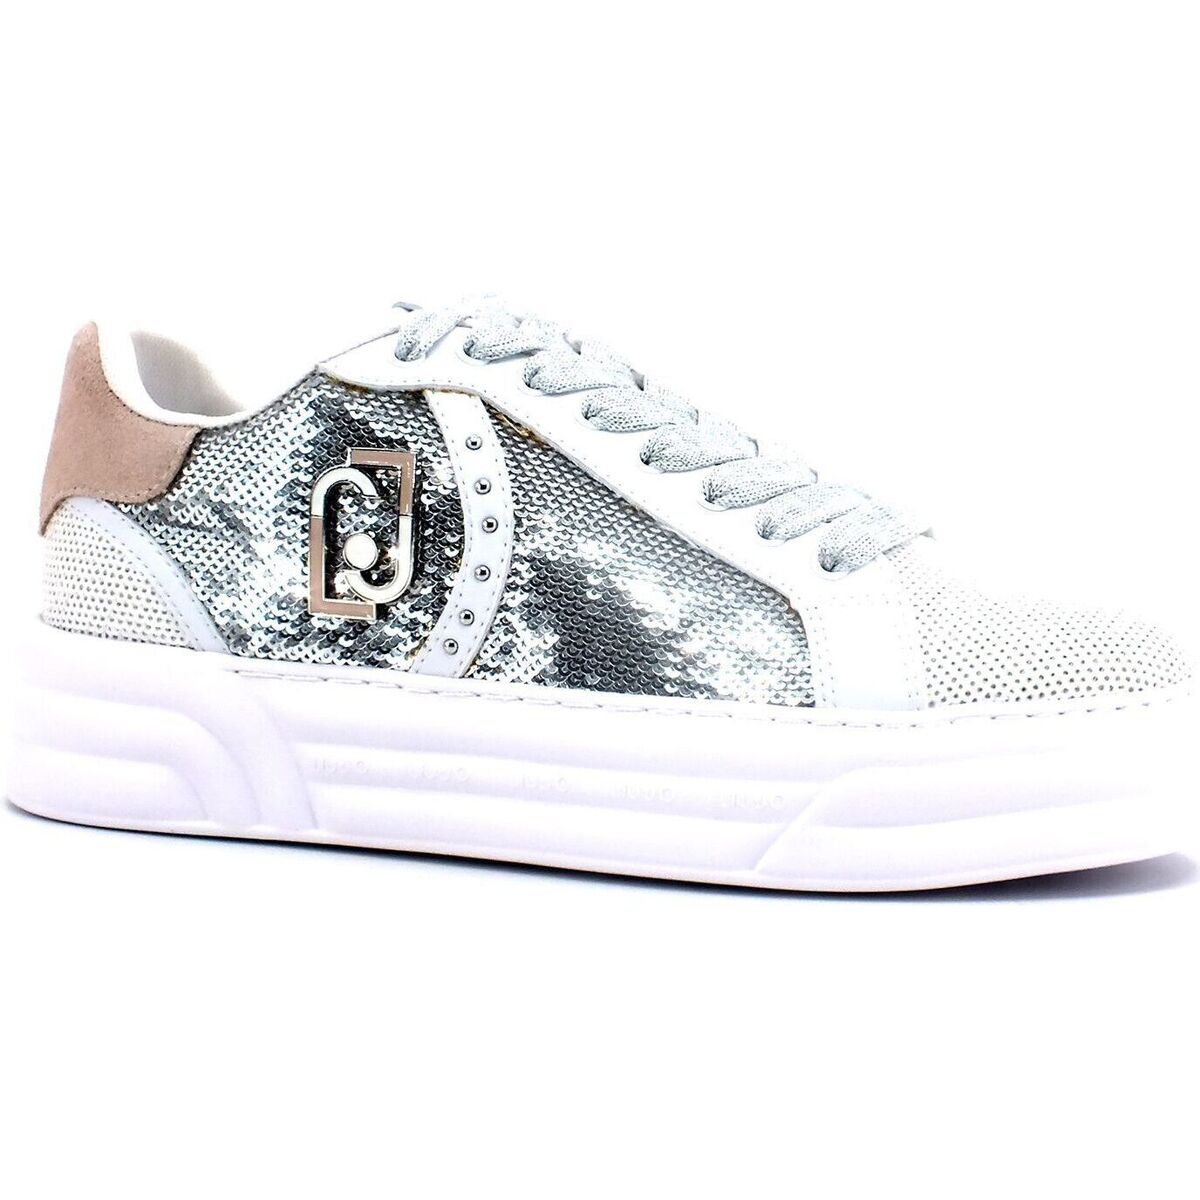 Chaussures Femme Bottes Liu Jo Cleo 08 Sneaker NF0A3YUPTE81 Paillettes Donna White BF2073TX055 Multicolore